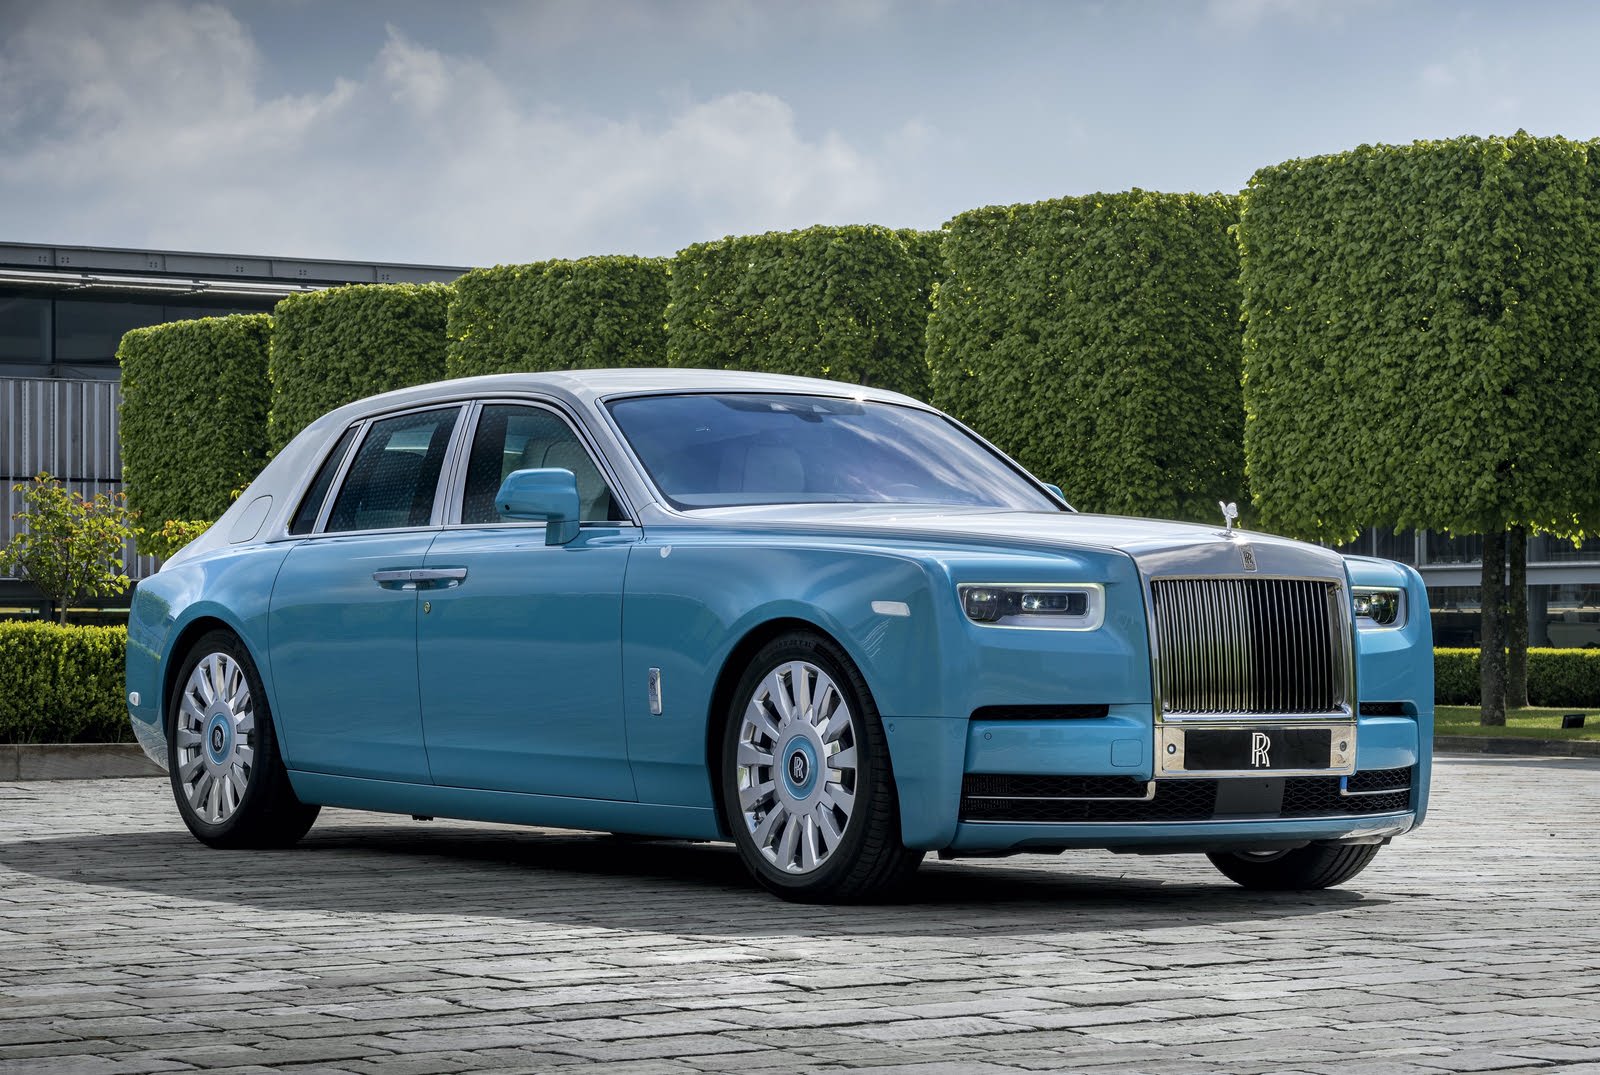 2020 Rolls-Royce Phantom Prices, Reviews, and Photos - MotorTrend